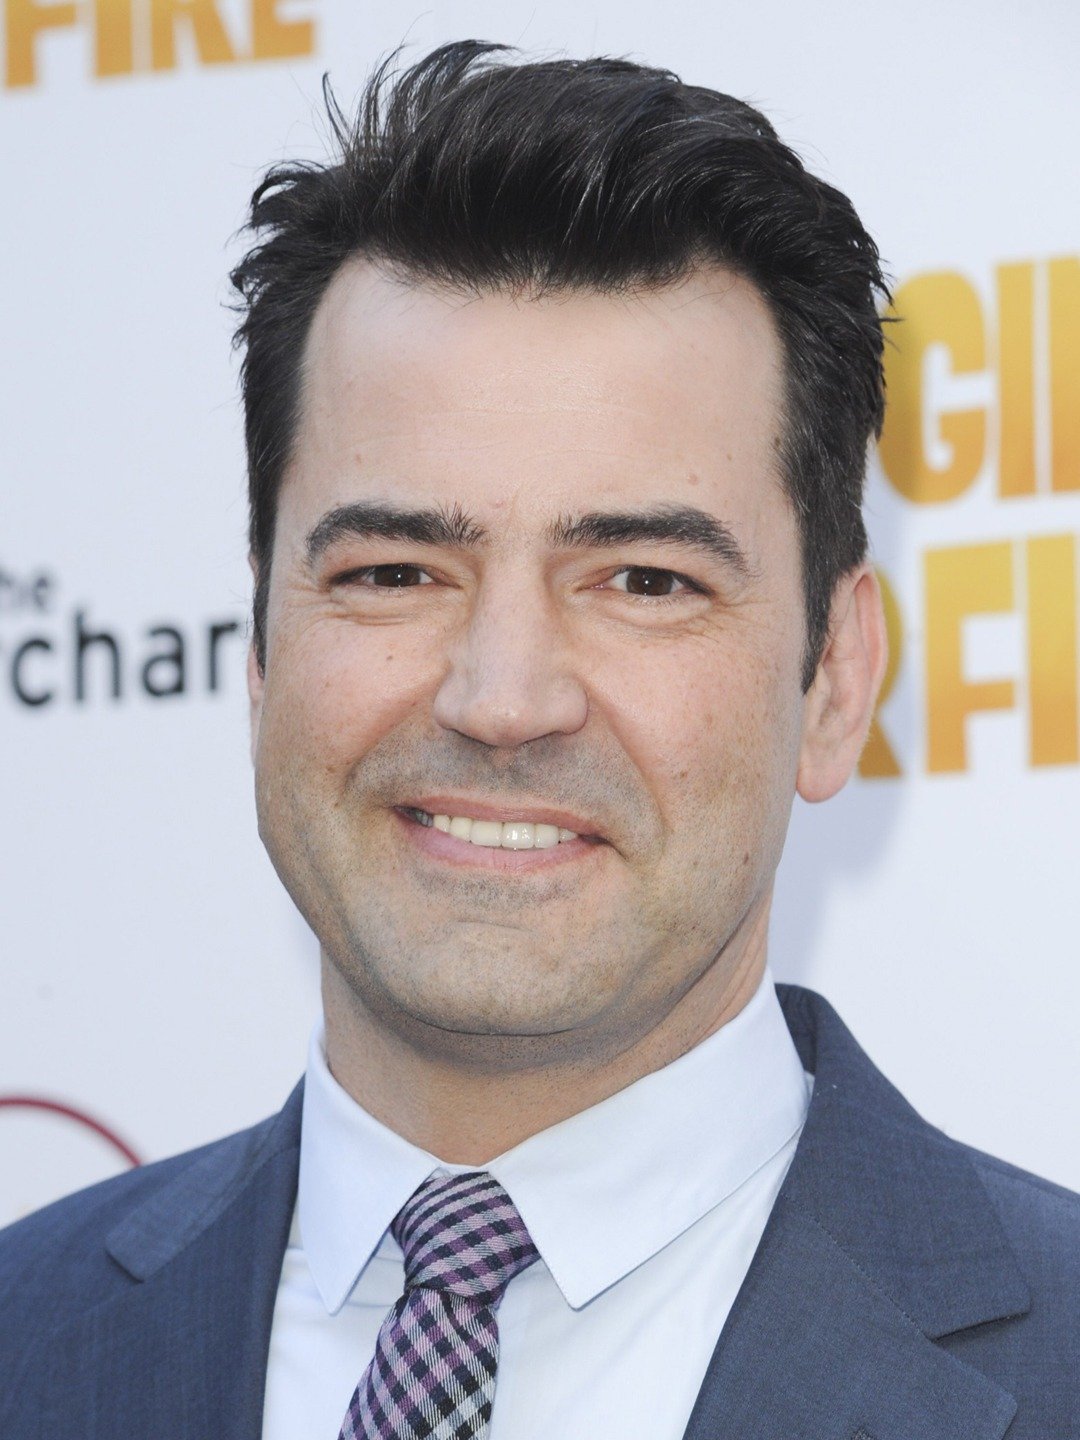 How tall is Ron Livingston?